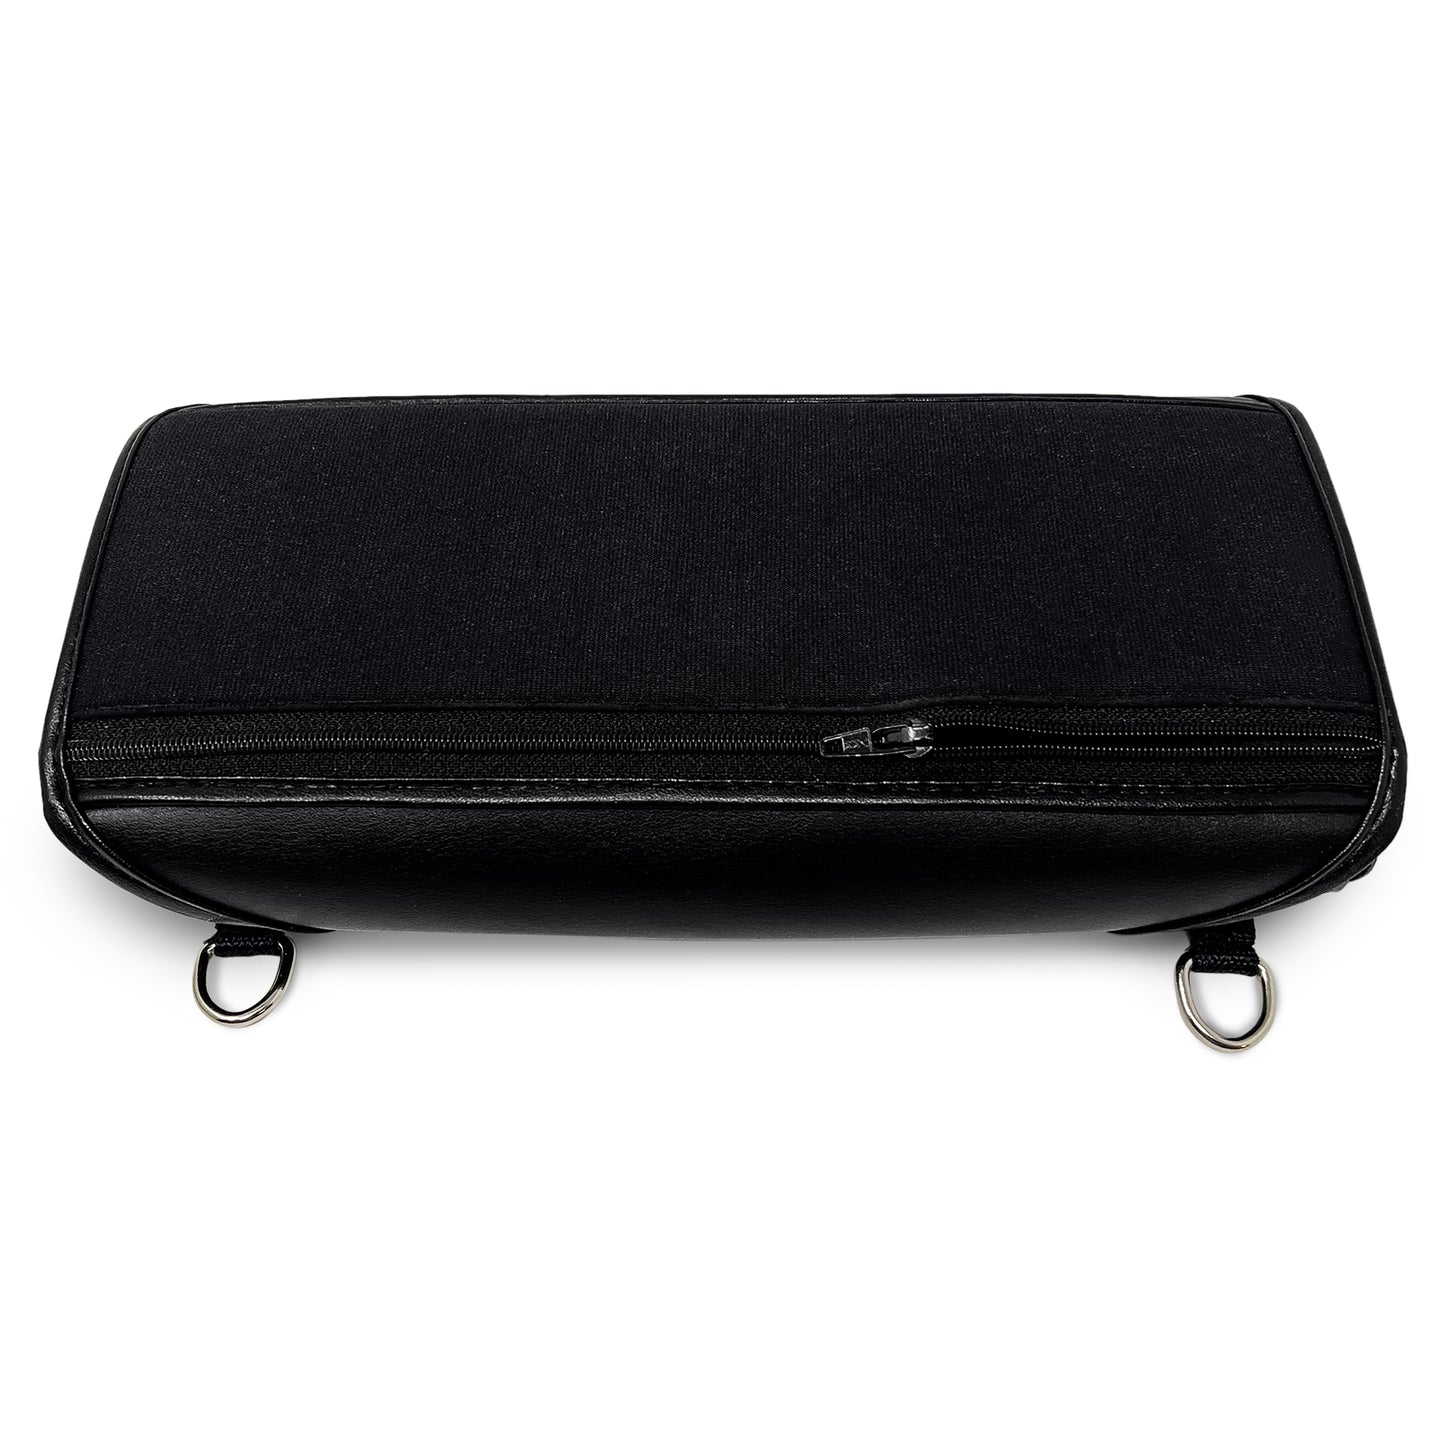 Eurobraille bNote20 Fitted Black Leather Case with Protective Key Cover and strap by Turtleback